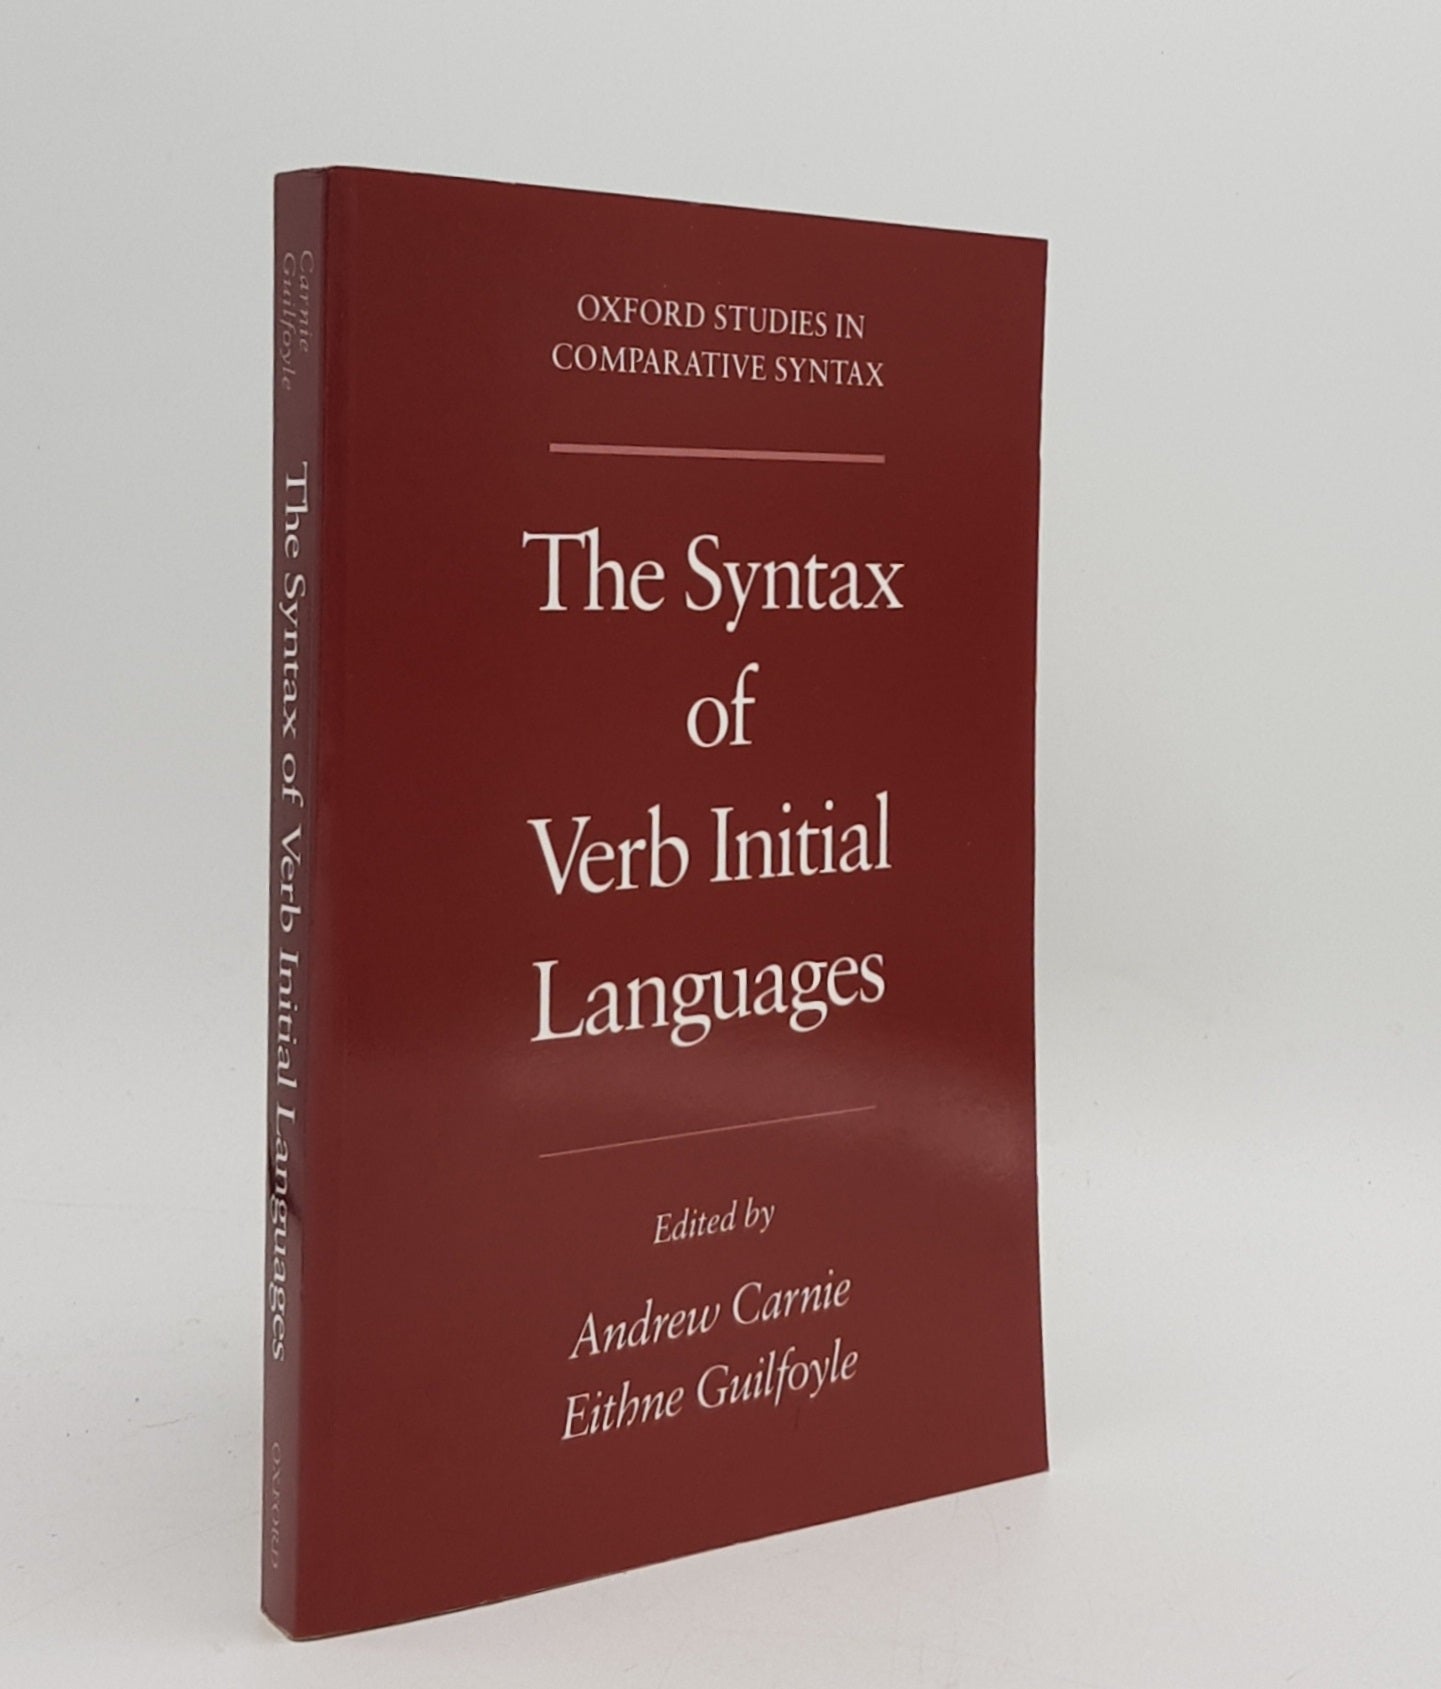 CARNIE Andrew, GUILFOYLE Eithne - The Syntax of Verb Initial Languages (Oxford Studies in Comparative Syntax)